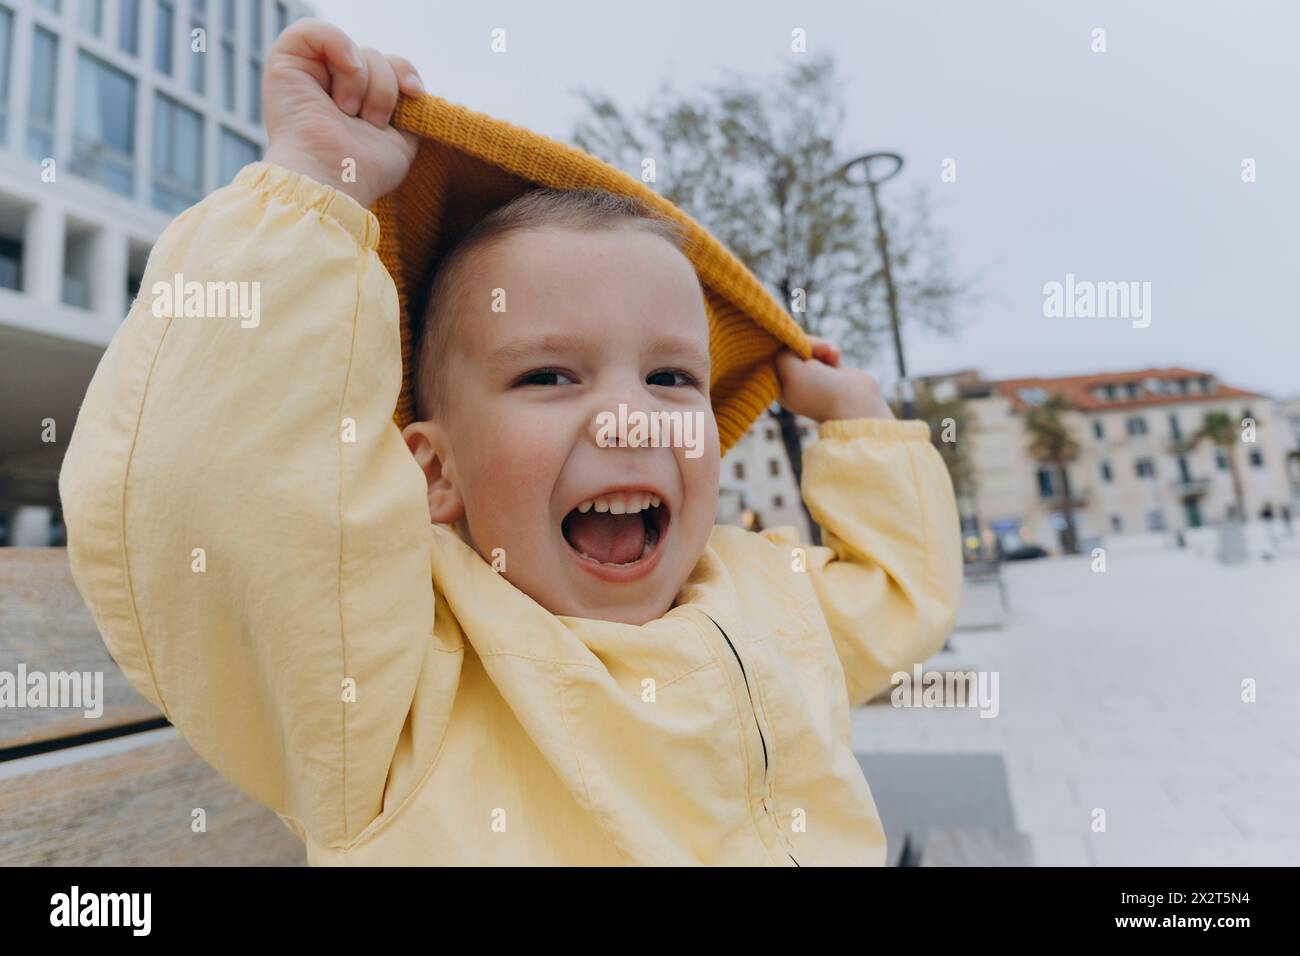 Cute boy playing with orange knit hat Stock Photo